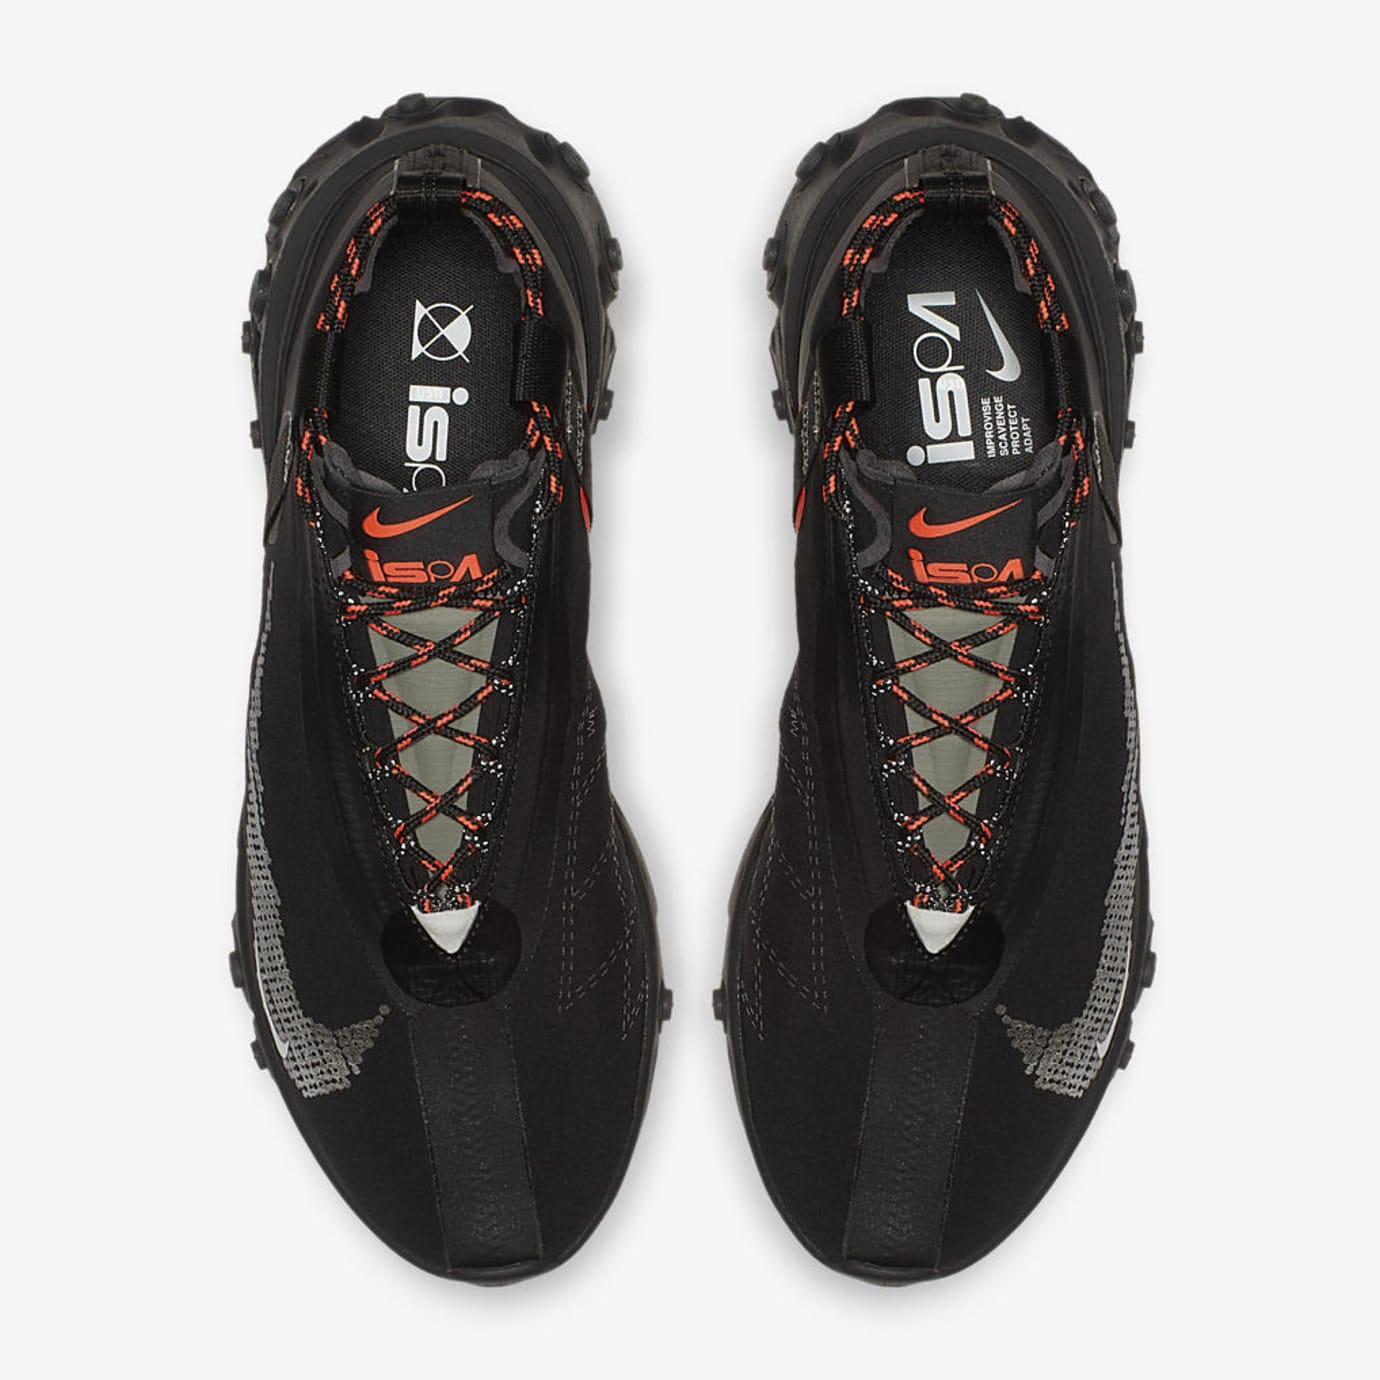 Nike React LW WR Mid ISPA Release Date | Sole Collector